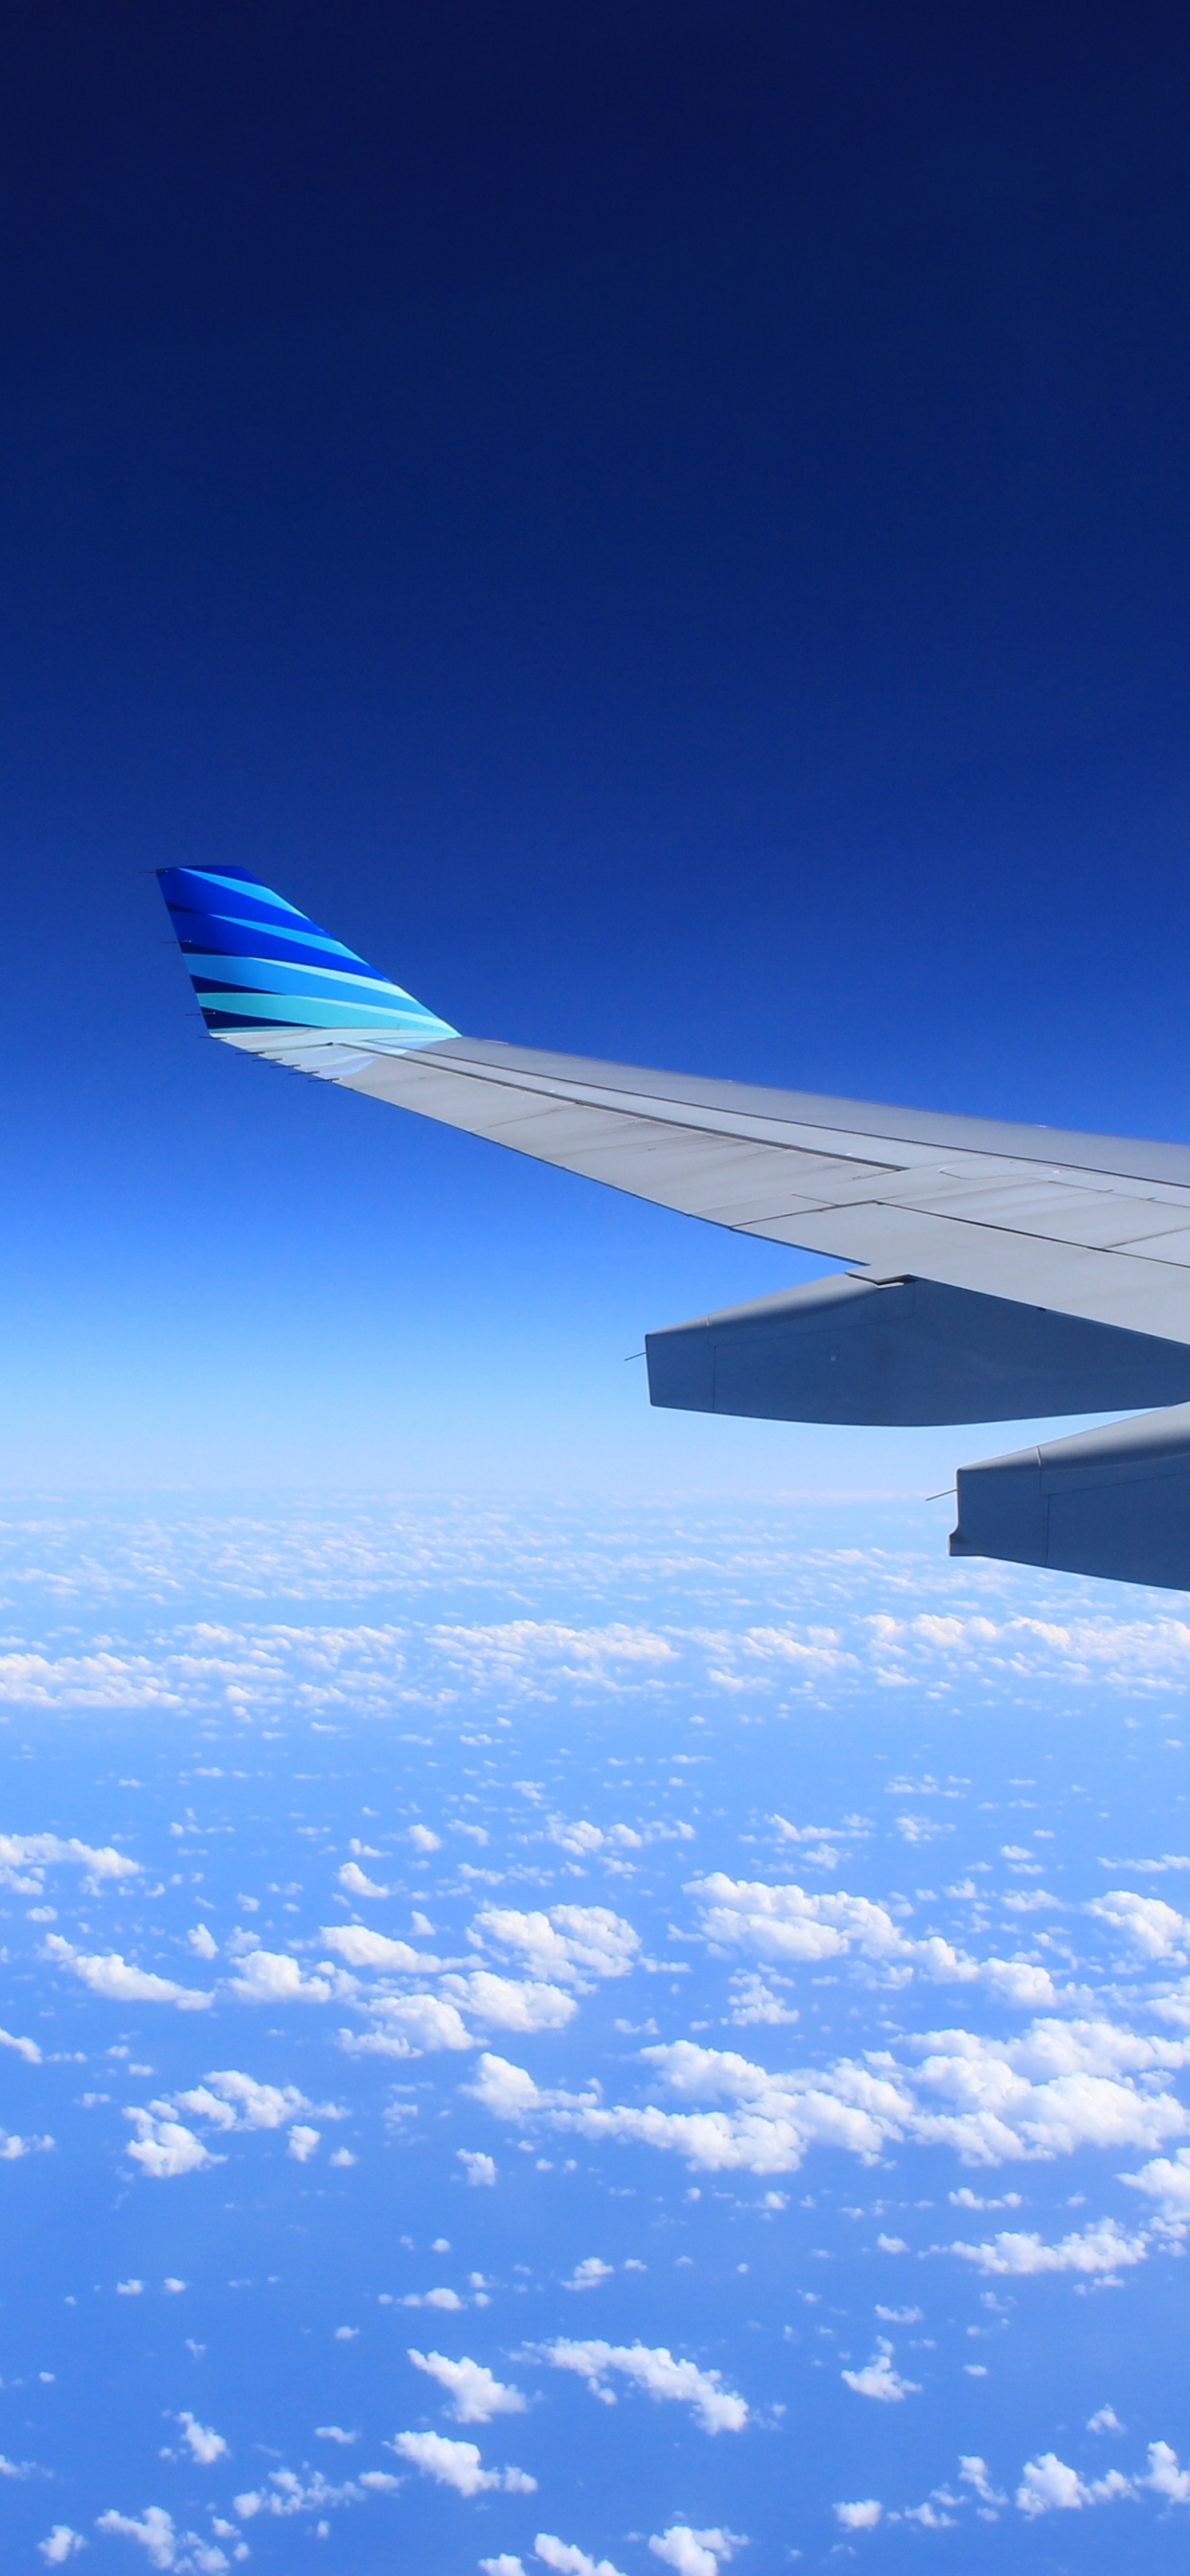 White and Blue Airplane Wing Under Blue Sky During Daytime. Wallpaper in 1242x2688 Resolution